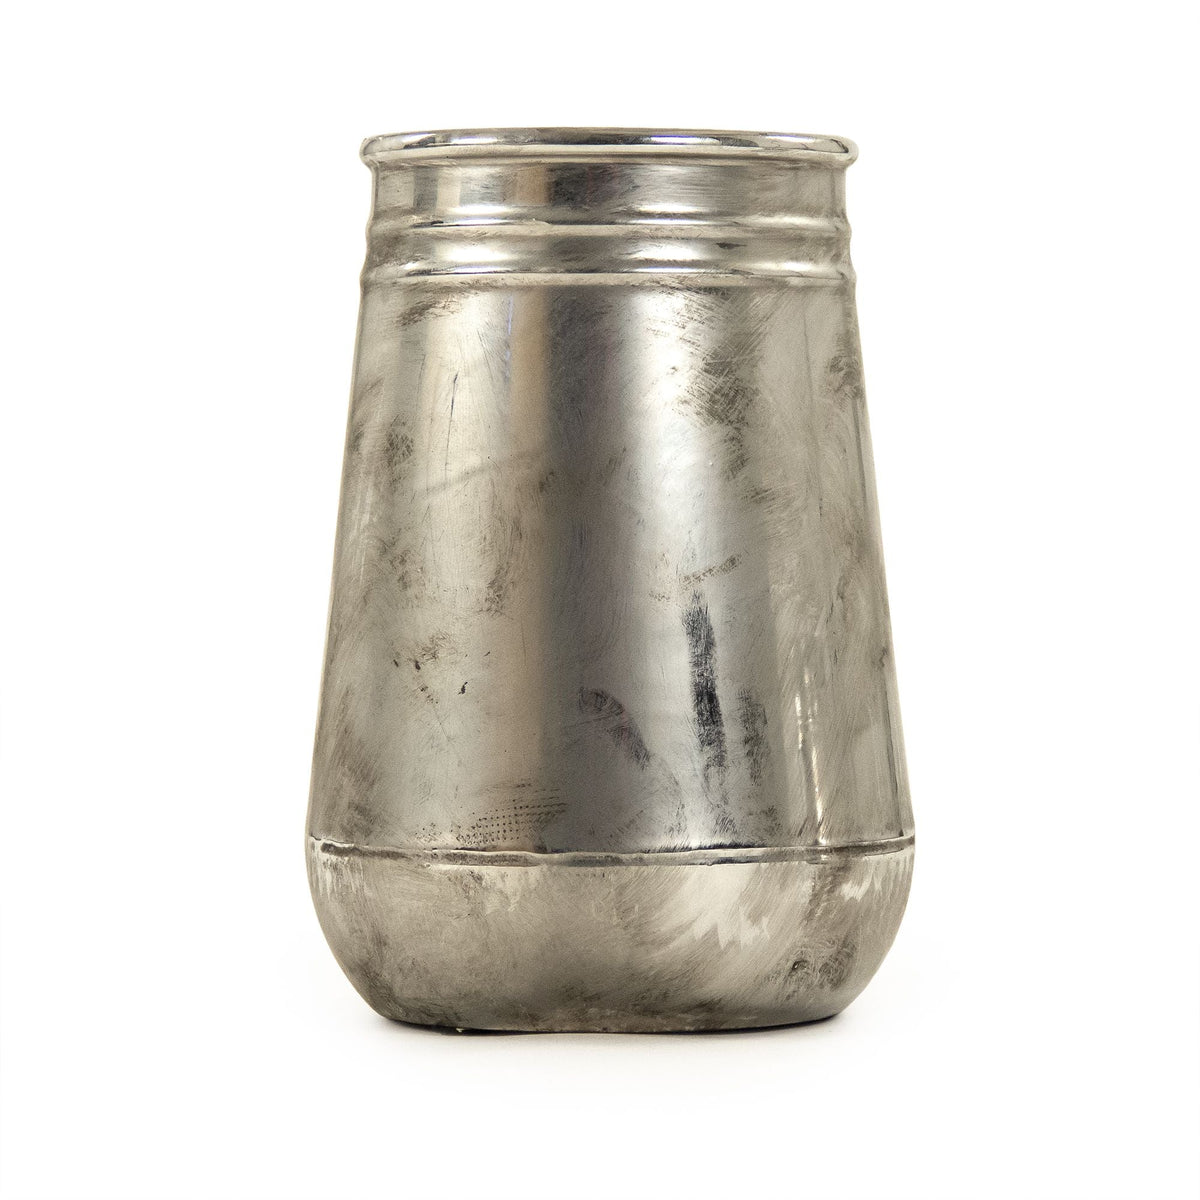 Distressed Metallic Silver Vase (10039S A840) by Zentique